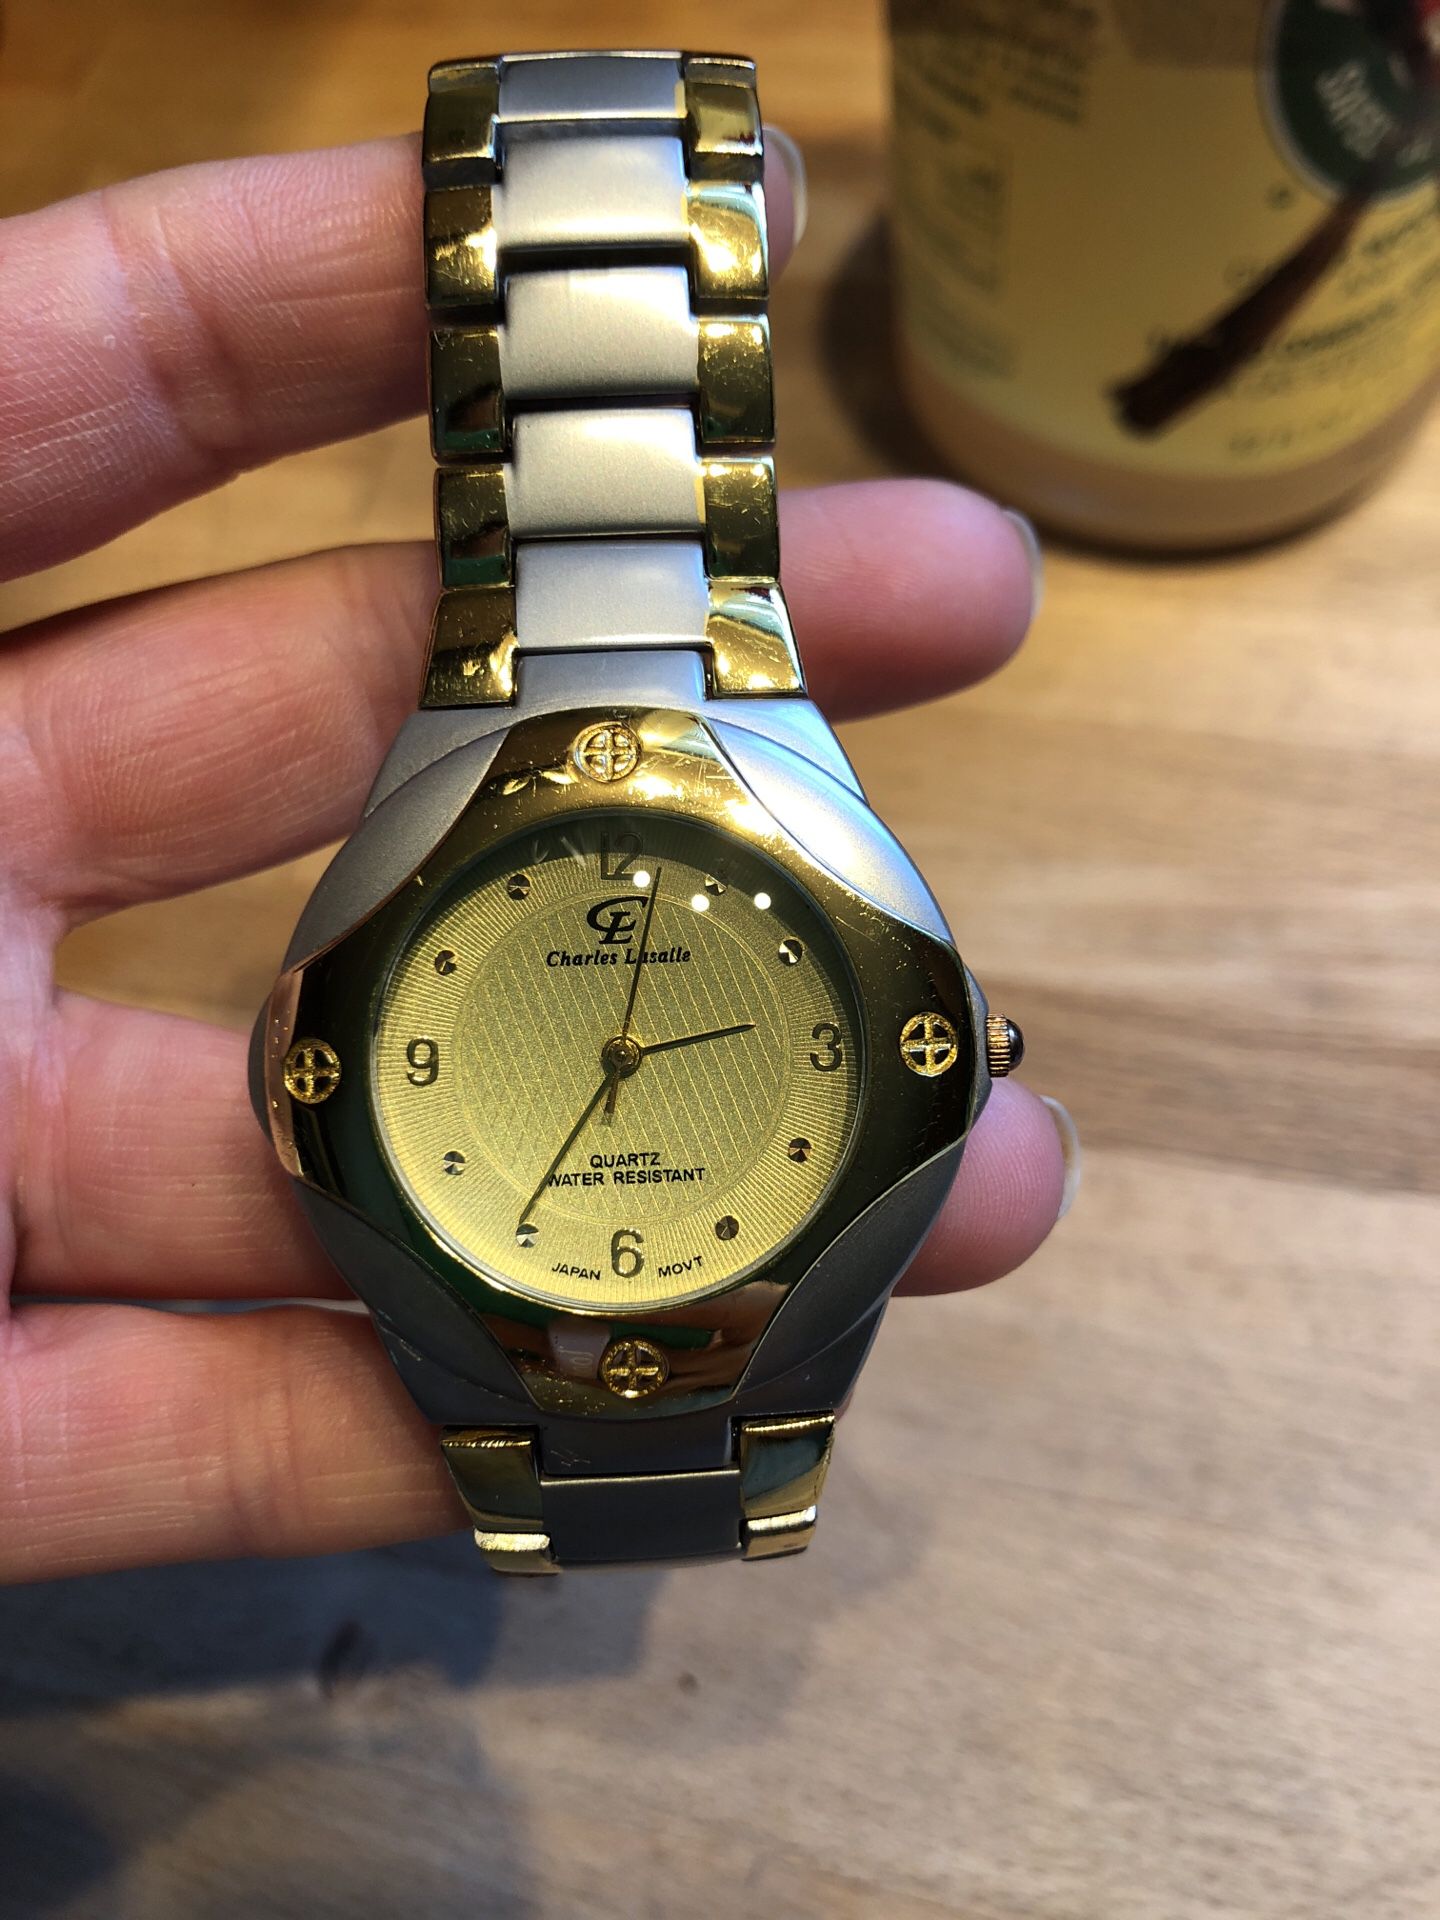 Charles Lasalle Designer watch for Sale in Olympia, WA - OfferUp